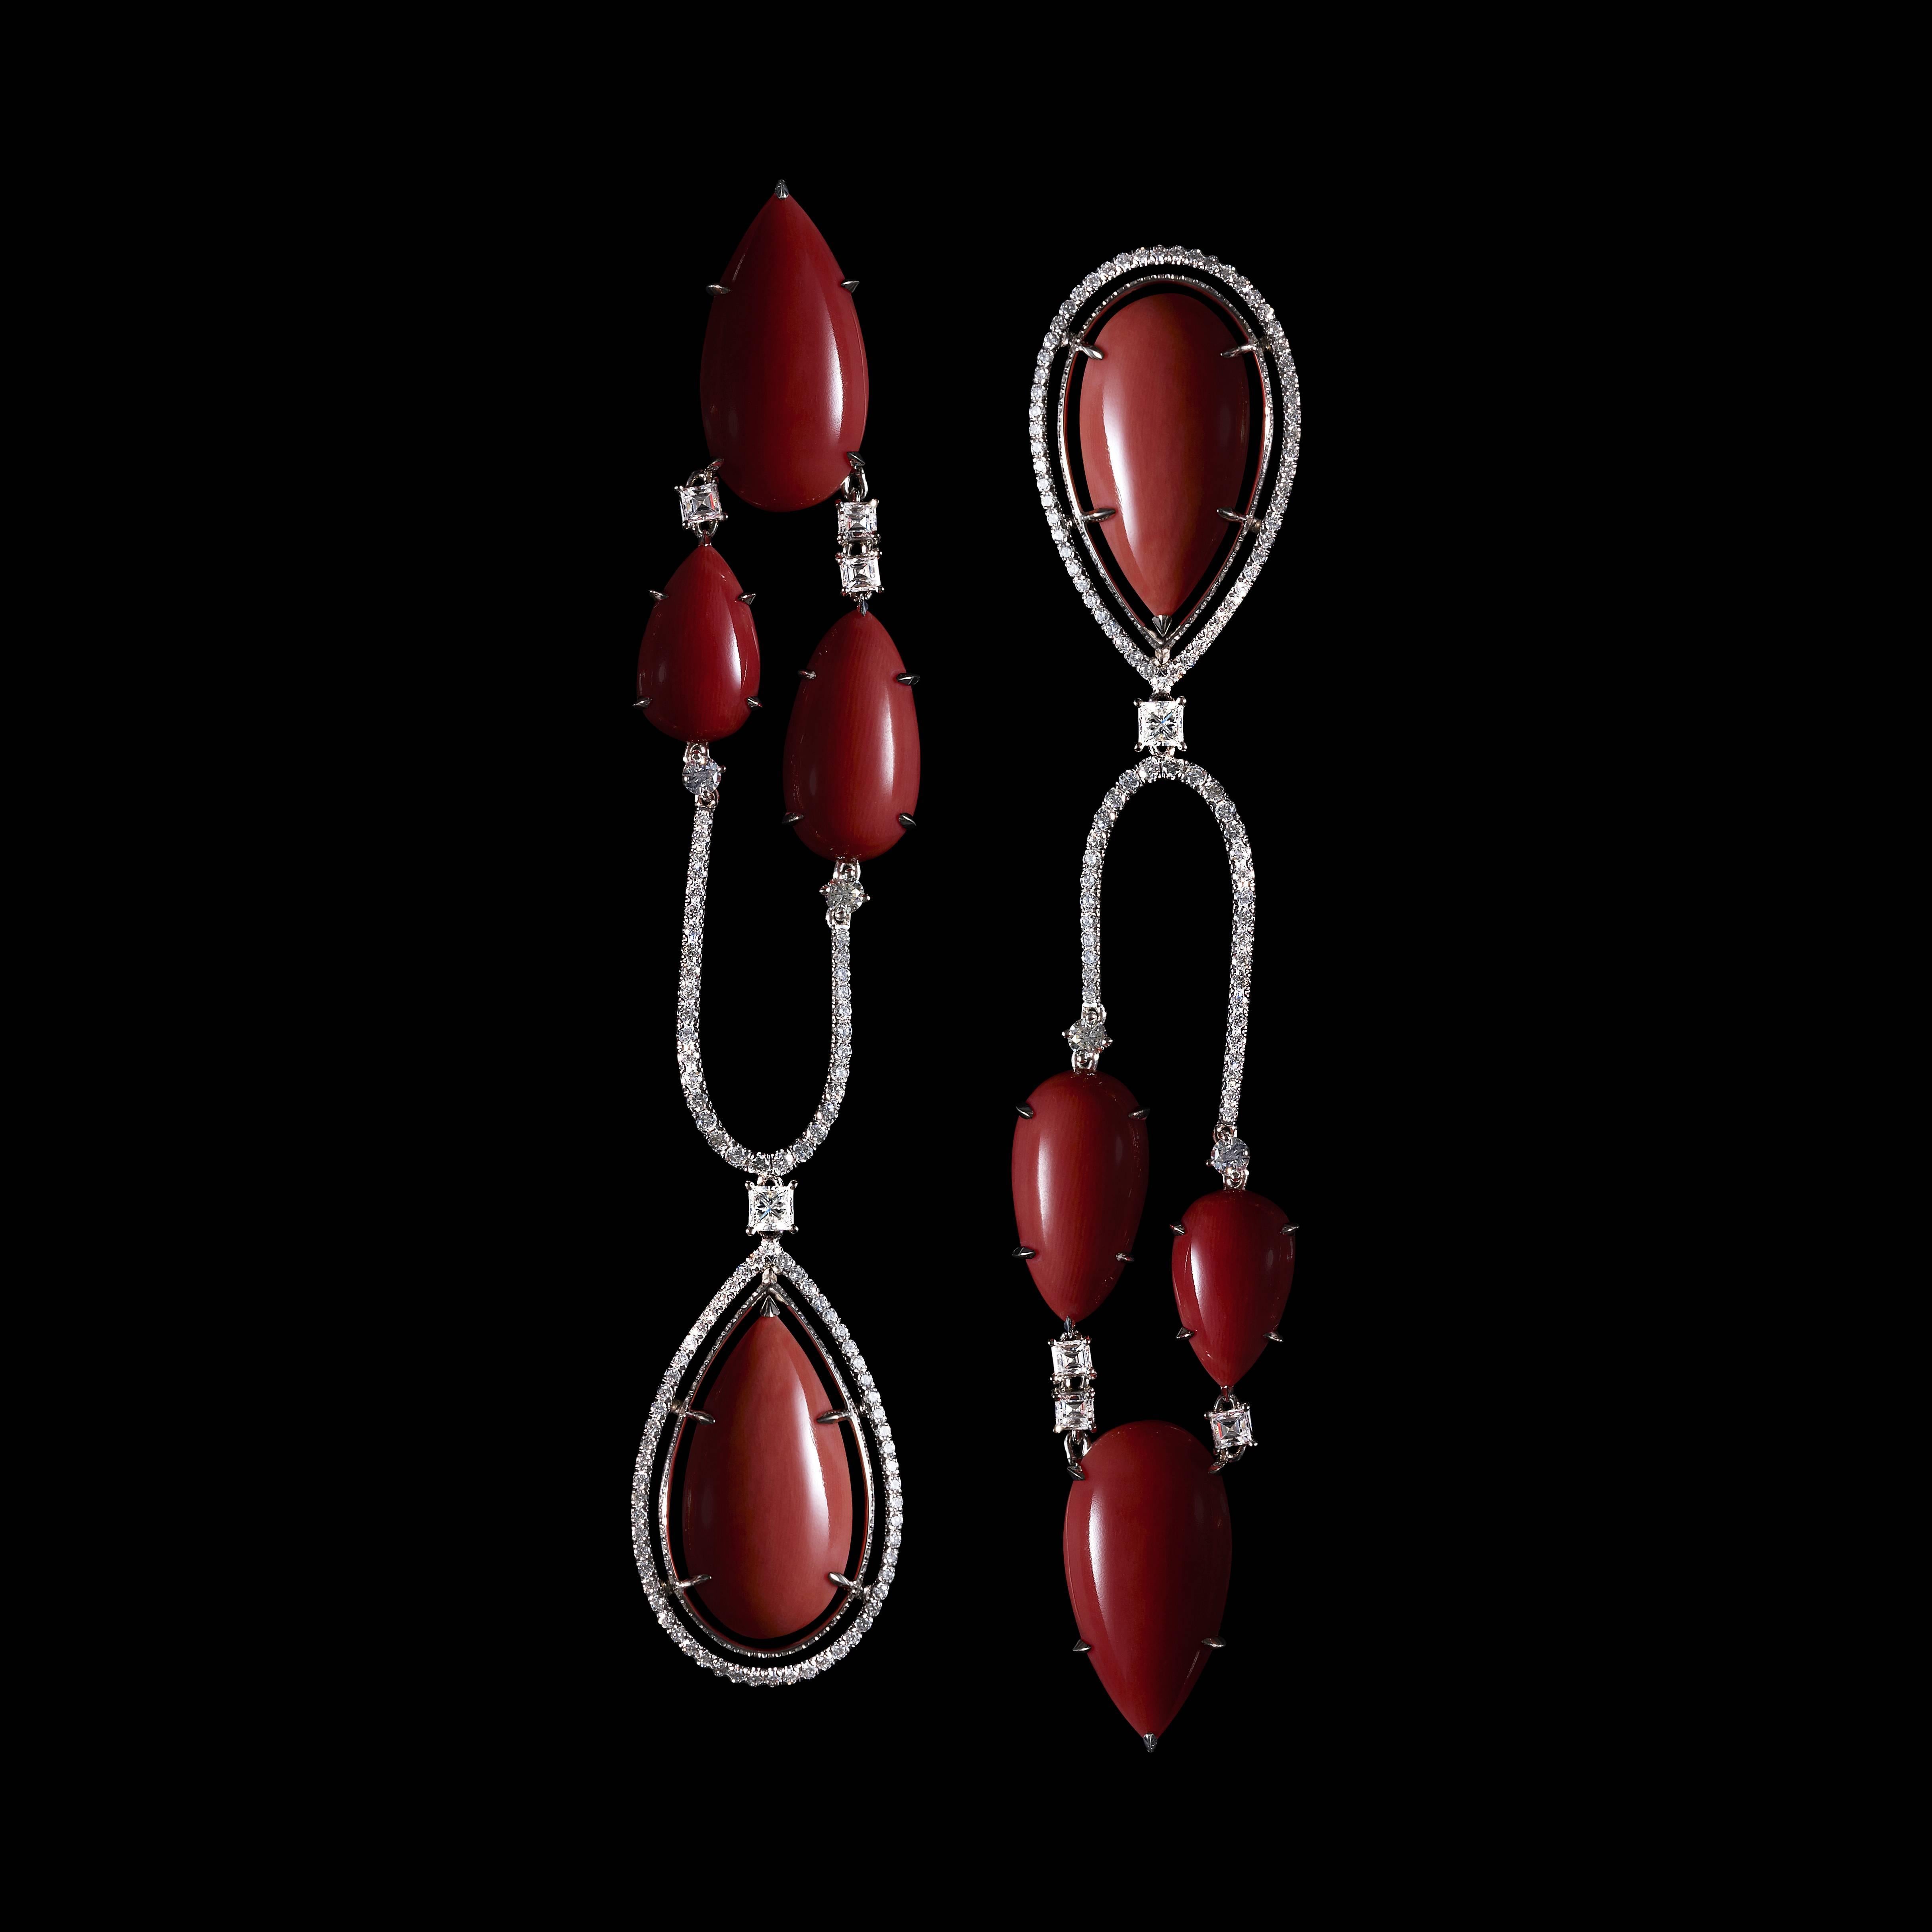 A limited-edition pair of Asymmetrical chandelier earrings features eight pear-shaped Corals and eight Fancy-shape Ideal-cut Diamonds. The Corals vary in color from precious deep red to pale pink, and are surrounded by Alexandra Mor's signature 1 mm